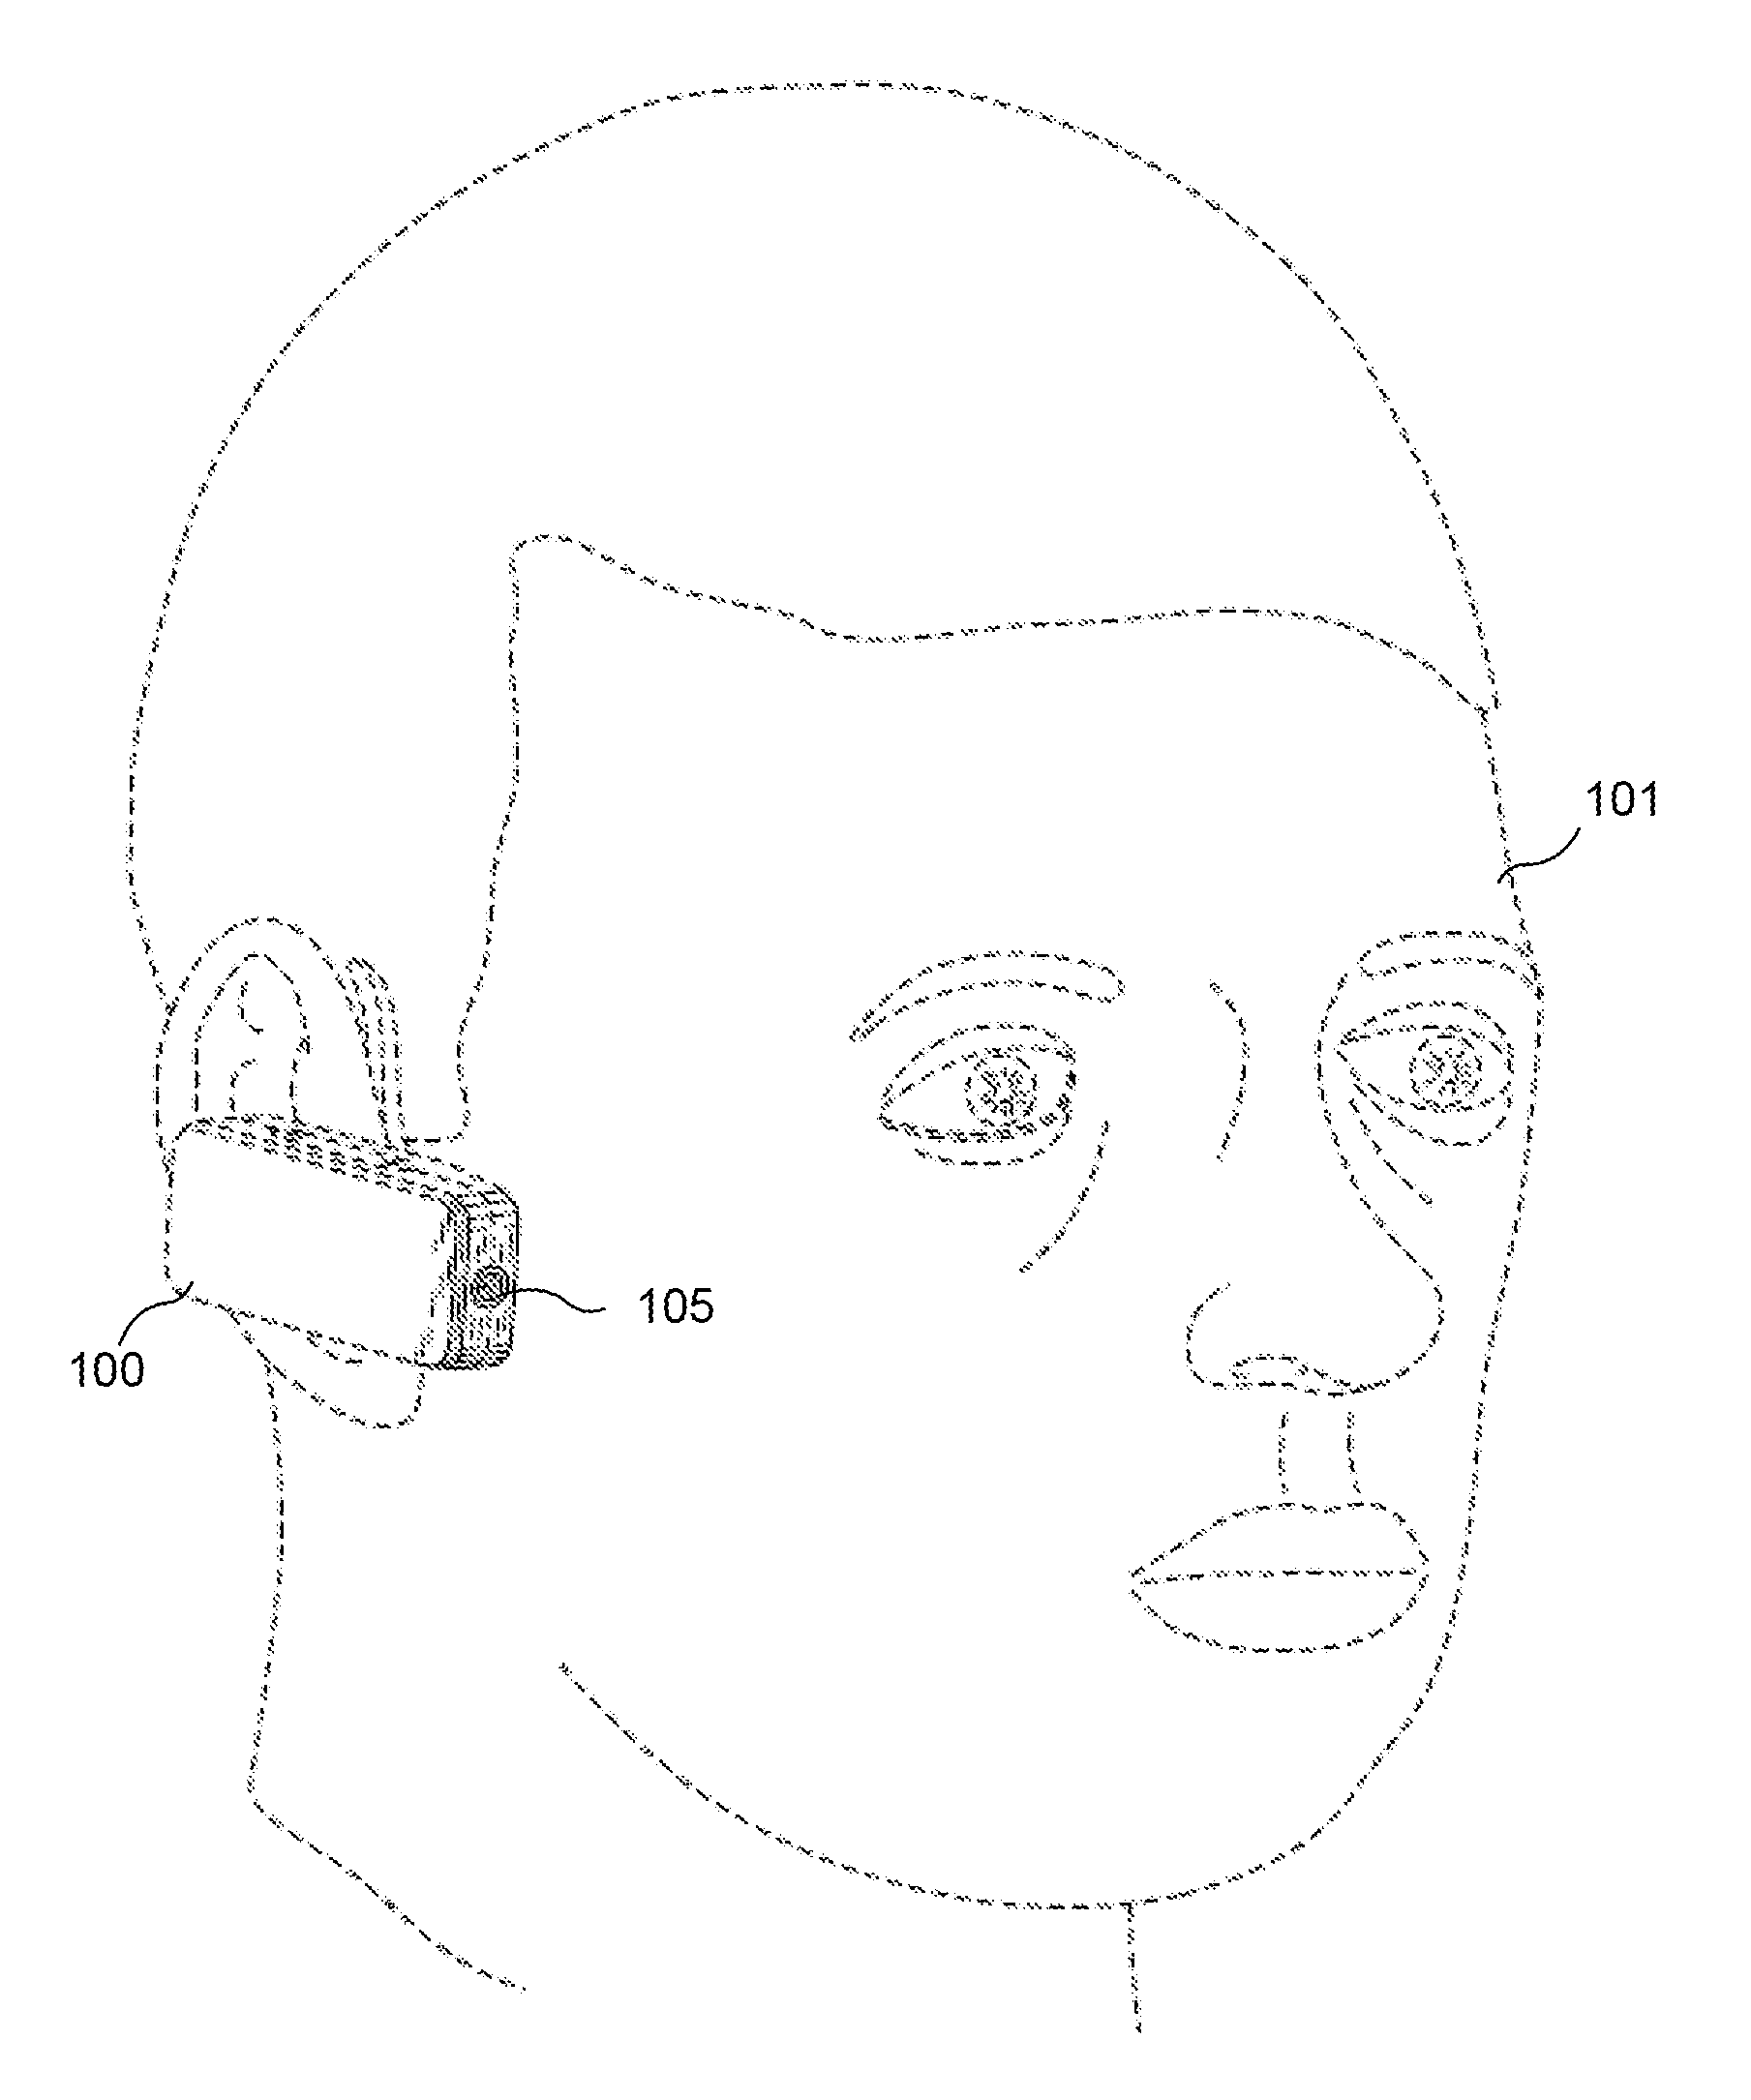 Creating and editing video recorded by a hands-free video recording device